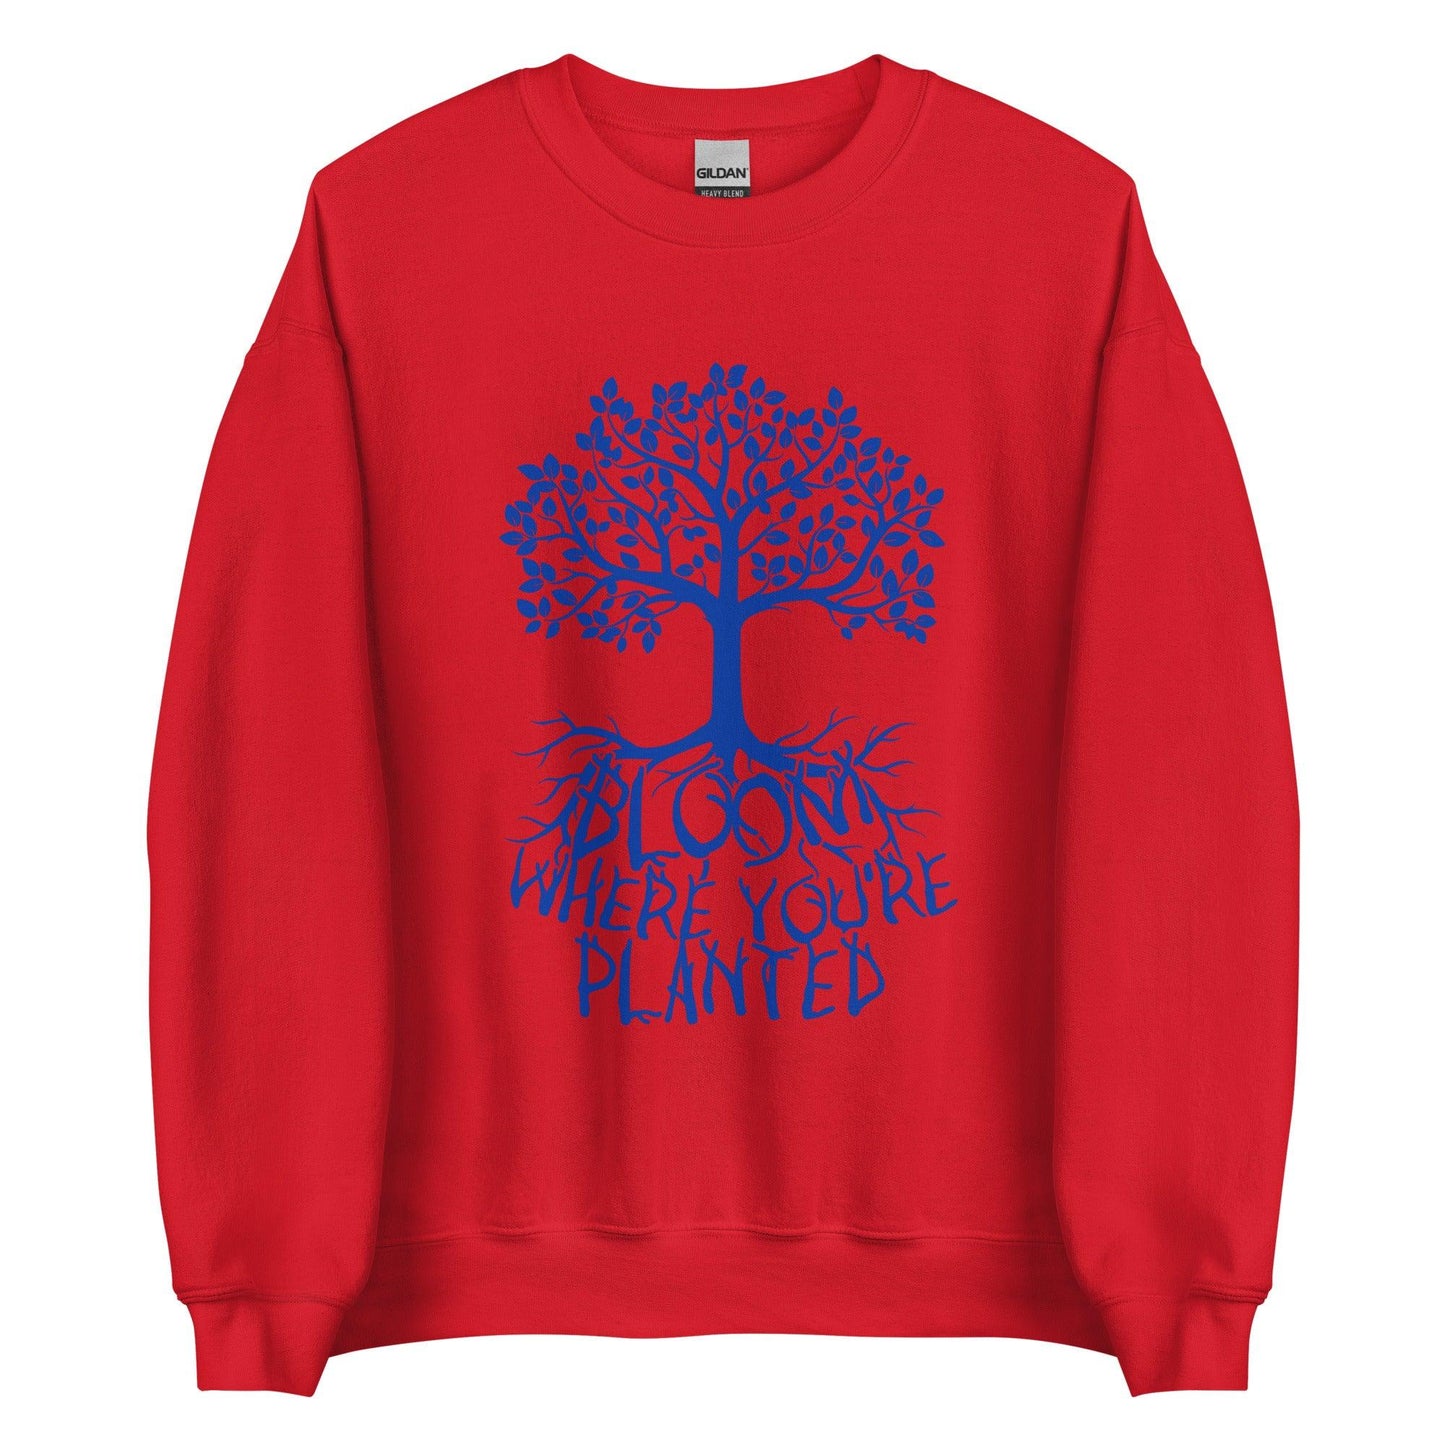 Nate Sestina "Where You're Planted" Sweatshirt - Fan Arch